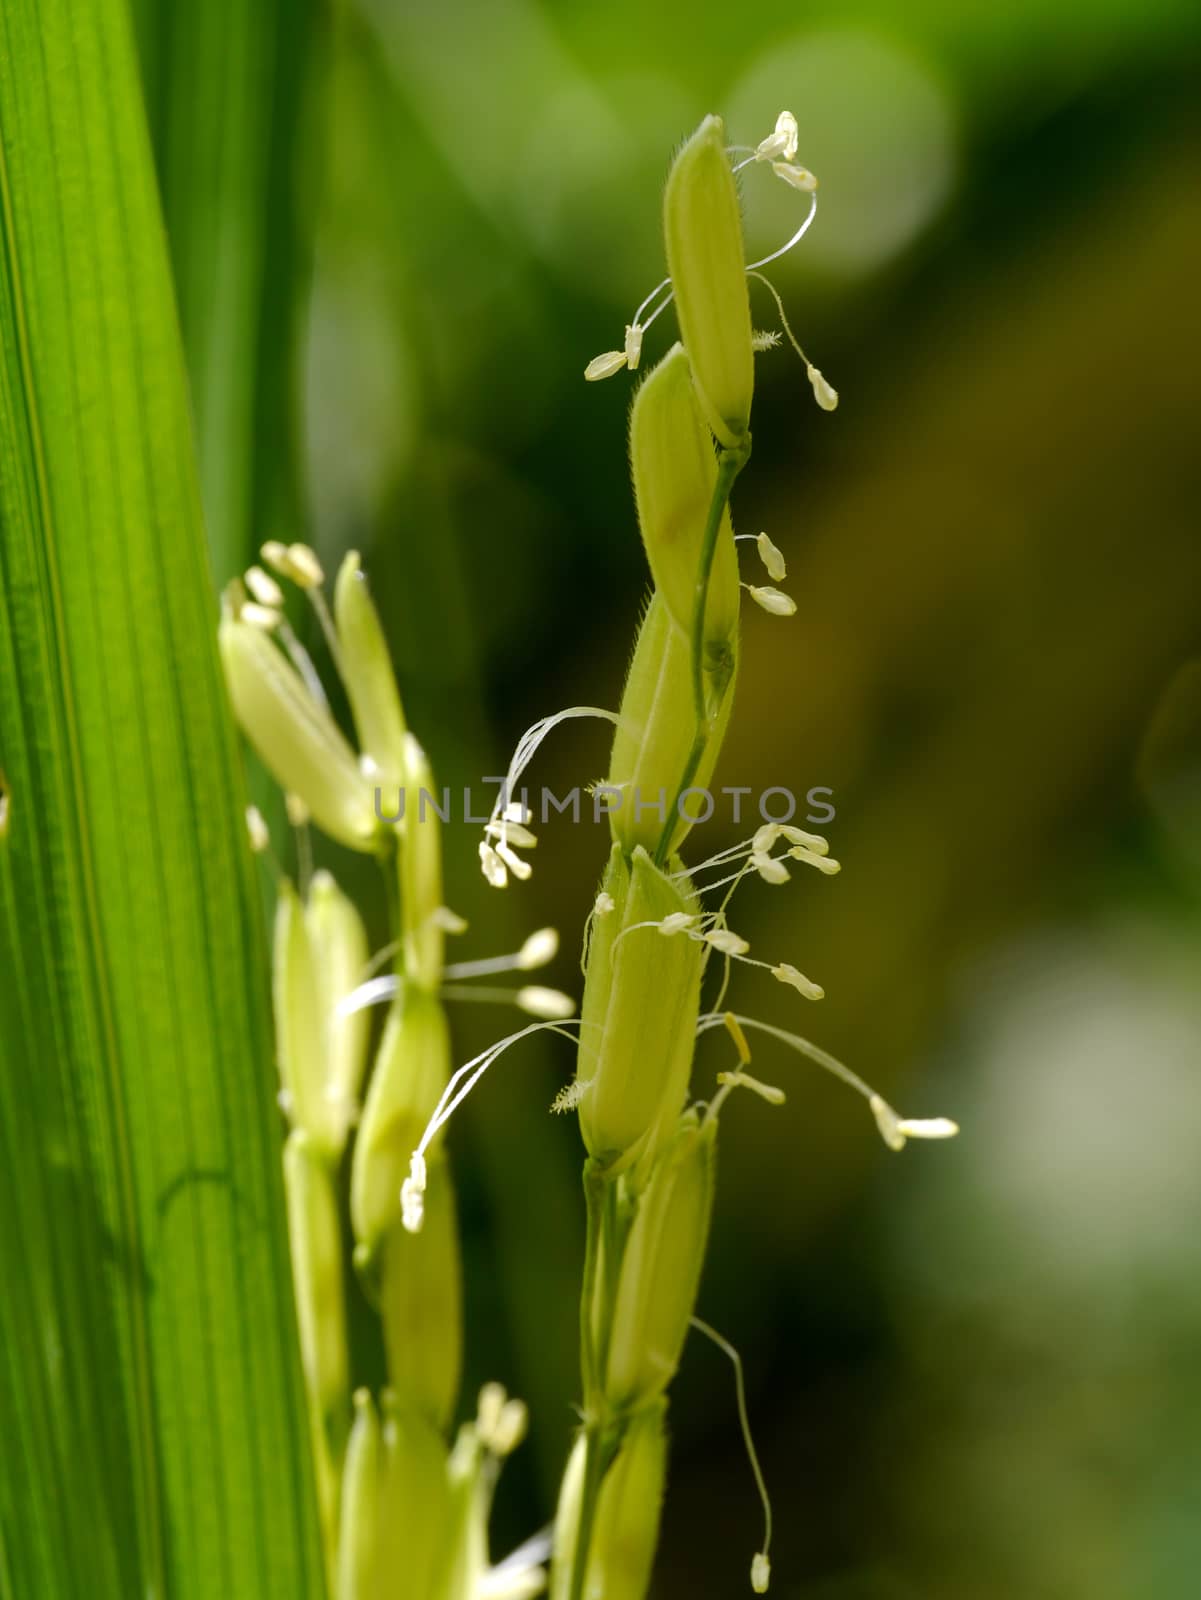 paddy stalk and flowers by Noppharat_th